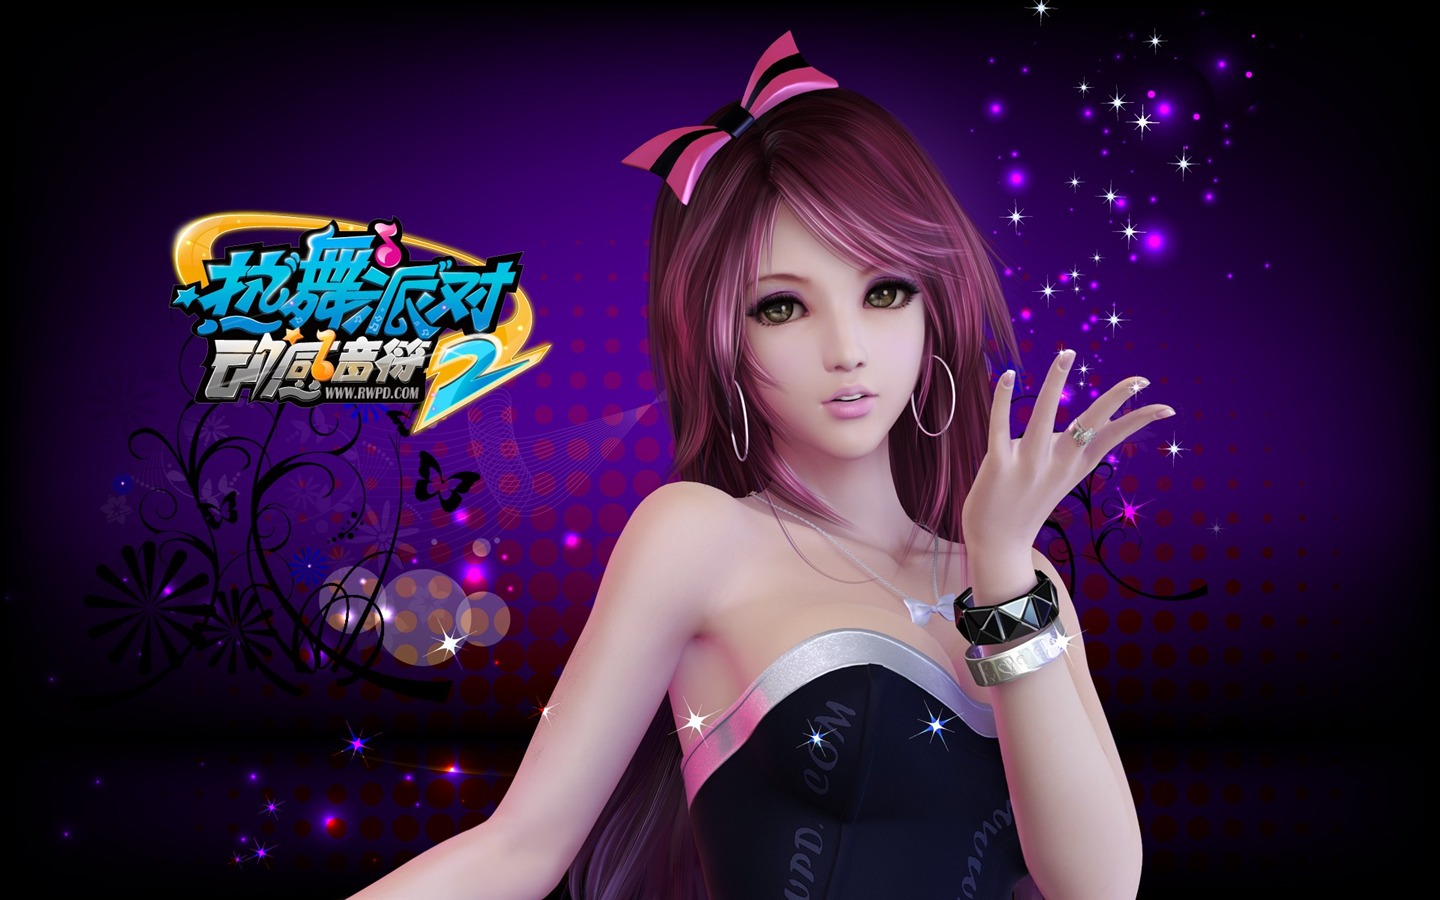 Online game Hot Dance Party II official wallpapers #33 - 1440x900